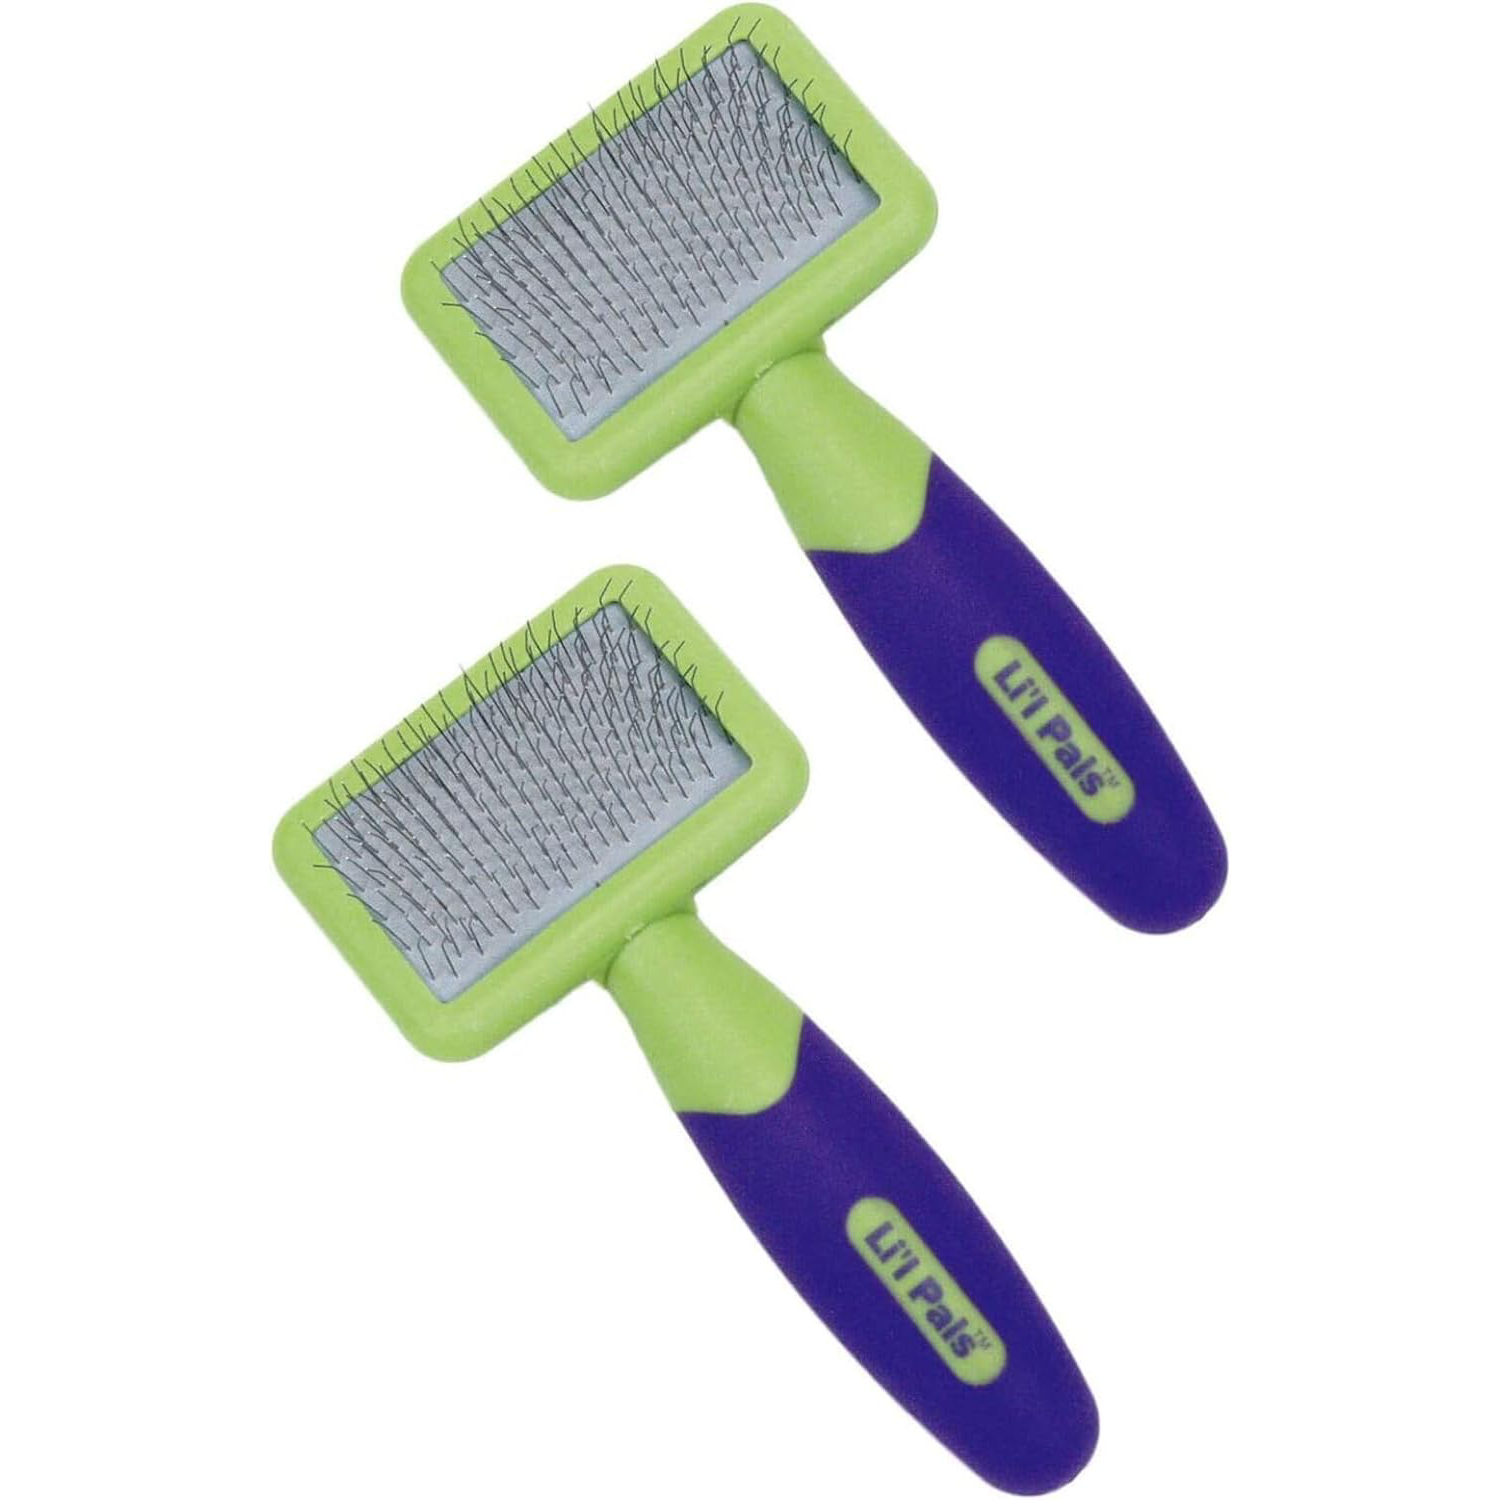 Soft Slicker Brush for Removing Mats, Tangles, and Loose Hair from Your Pets new